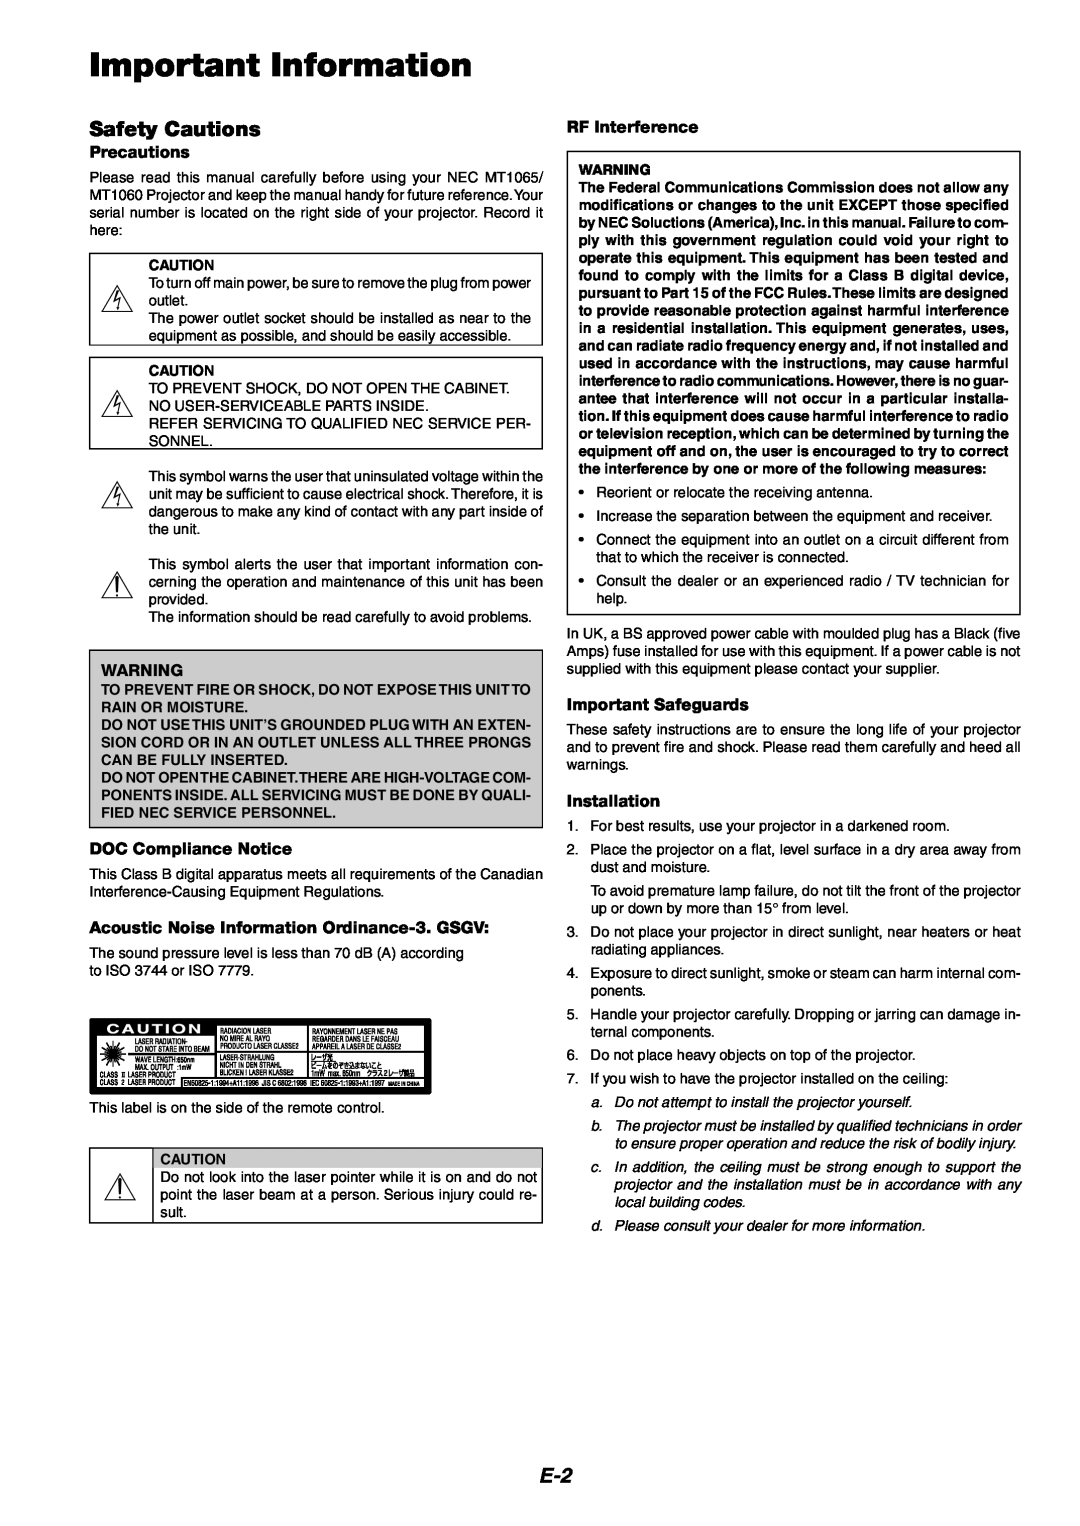 NEC MT1065/MT1060 user manual Important Information, Safety Cautions, Precautions, DOC Compliance Notice, RF Interference 